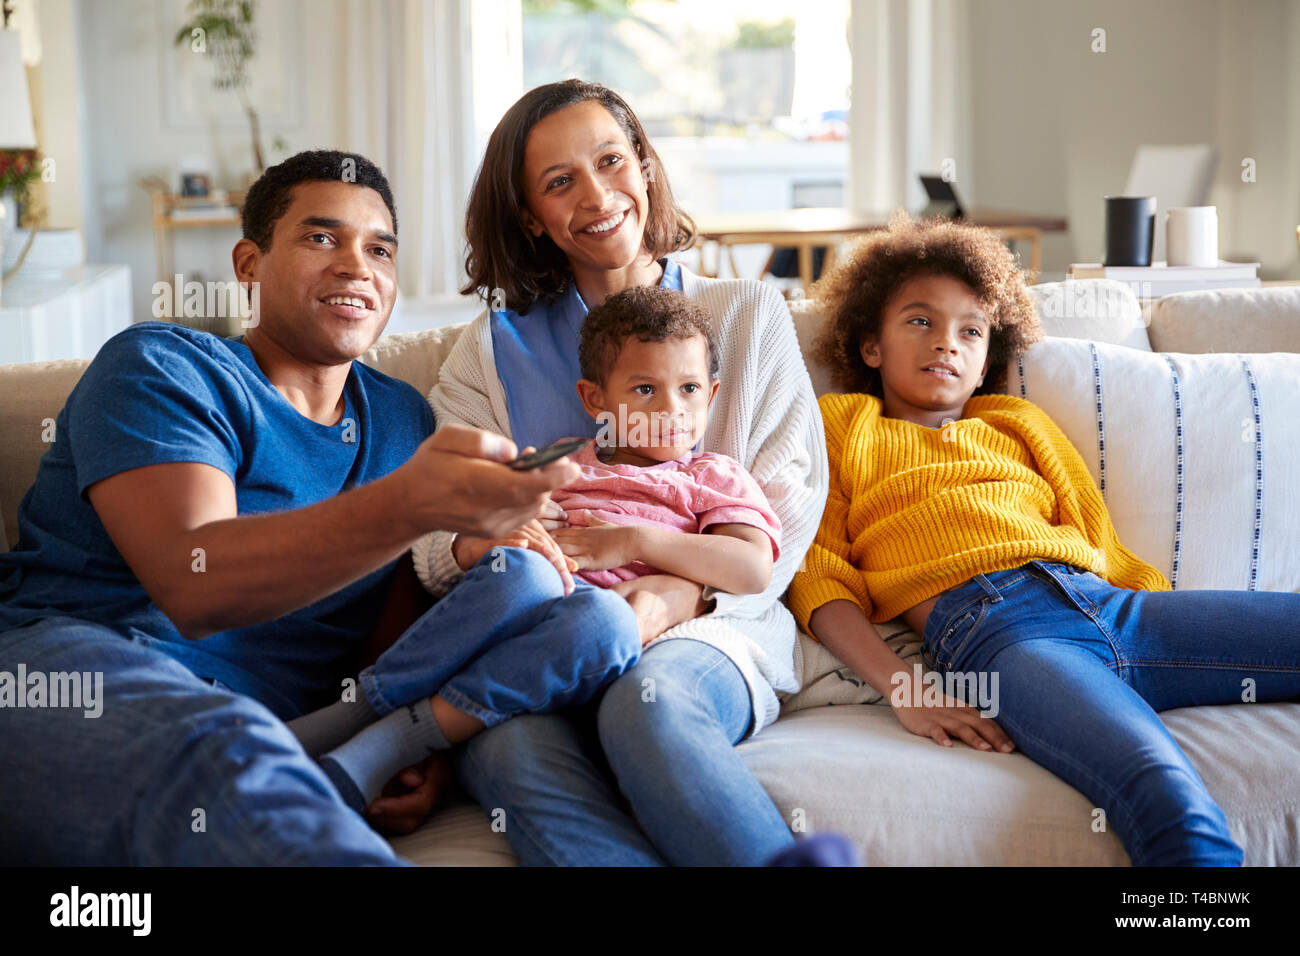 Front view of young family sitting together on the sofa in their living room watching TV, close up, front view Stock Photo